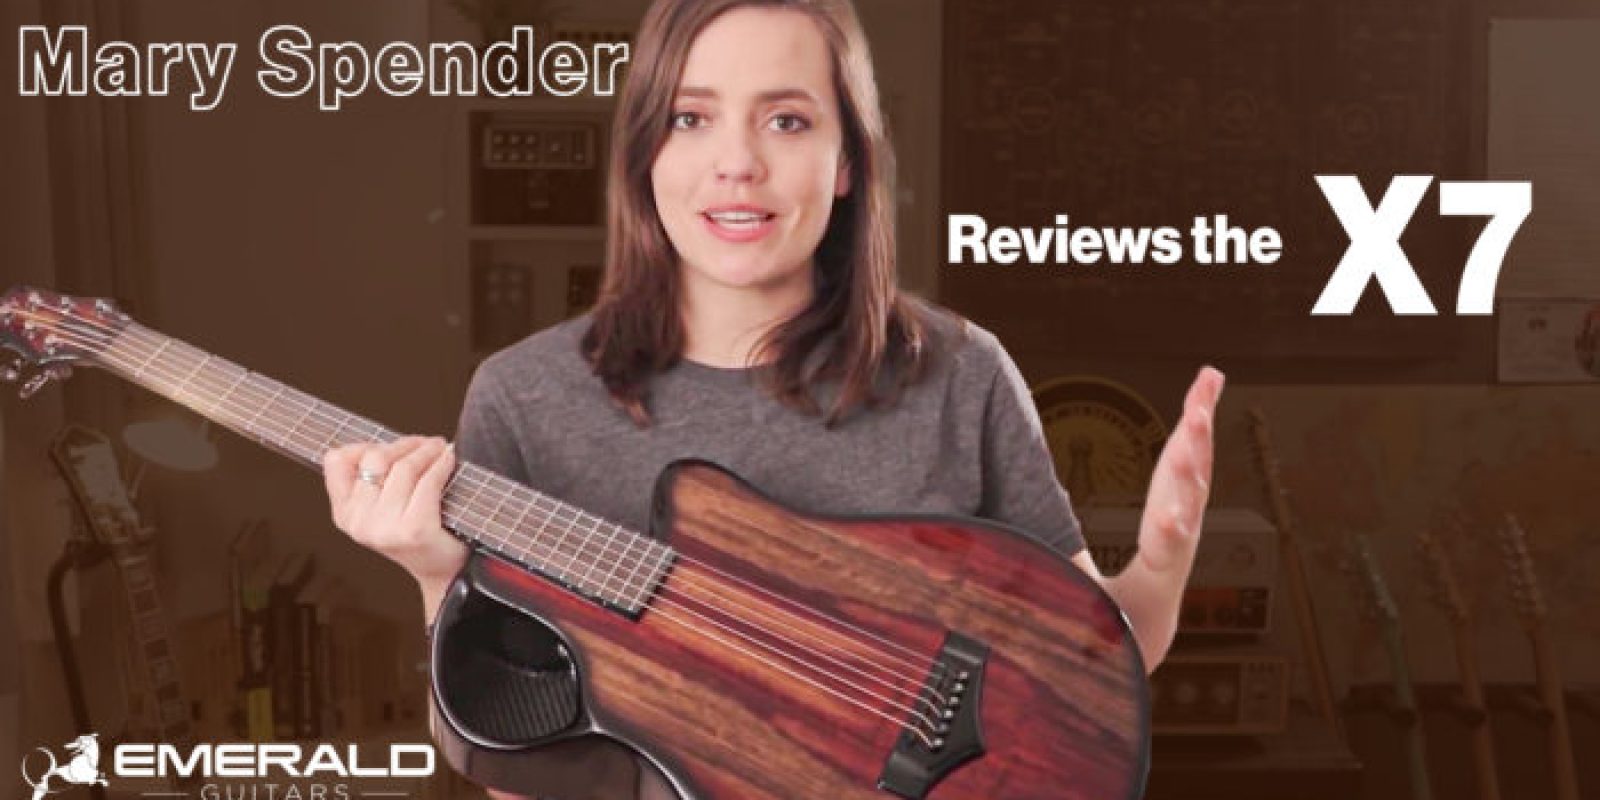 Mary Spender reviewing the Emerald X7 guitar